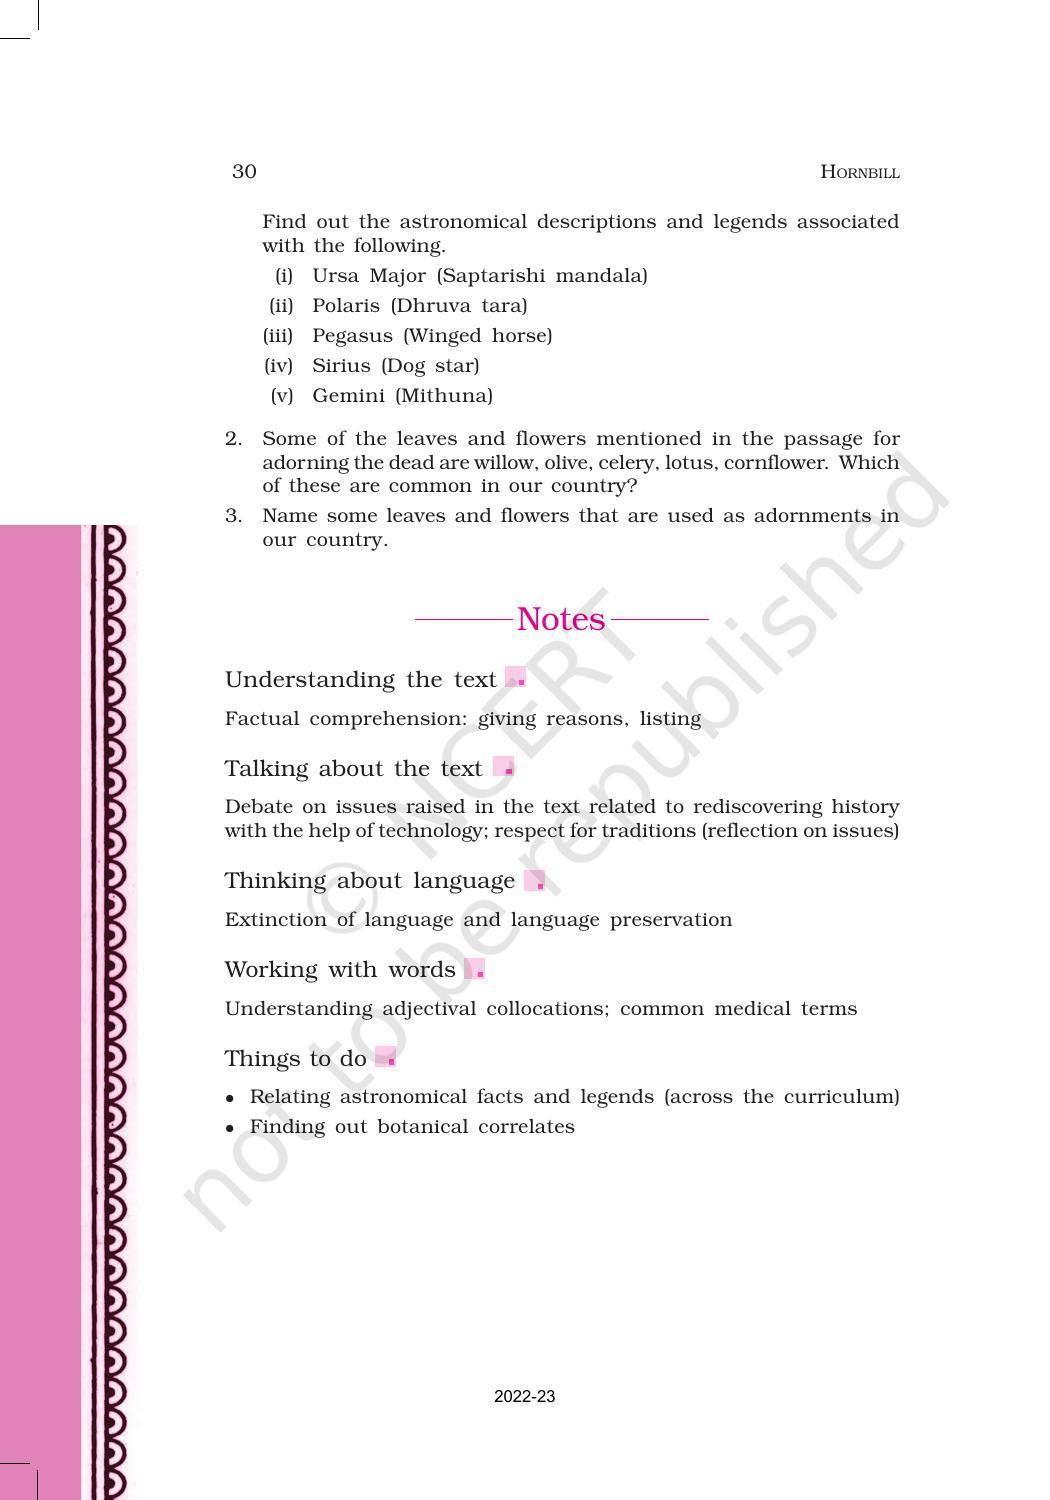 NCERT Book for Class 11 English Hornbill Chapter 3 Discovering Tut: The Saga Continues - Page 9